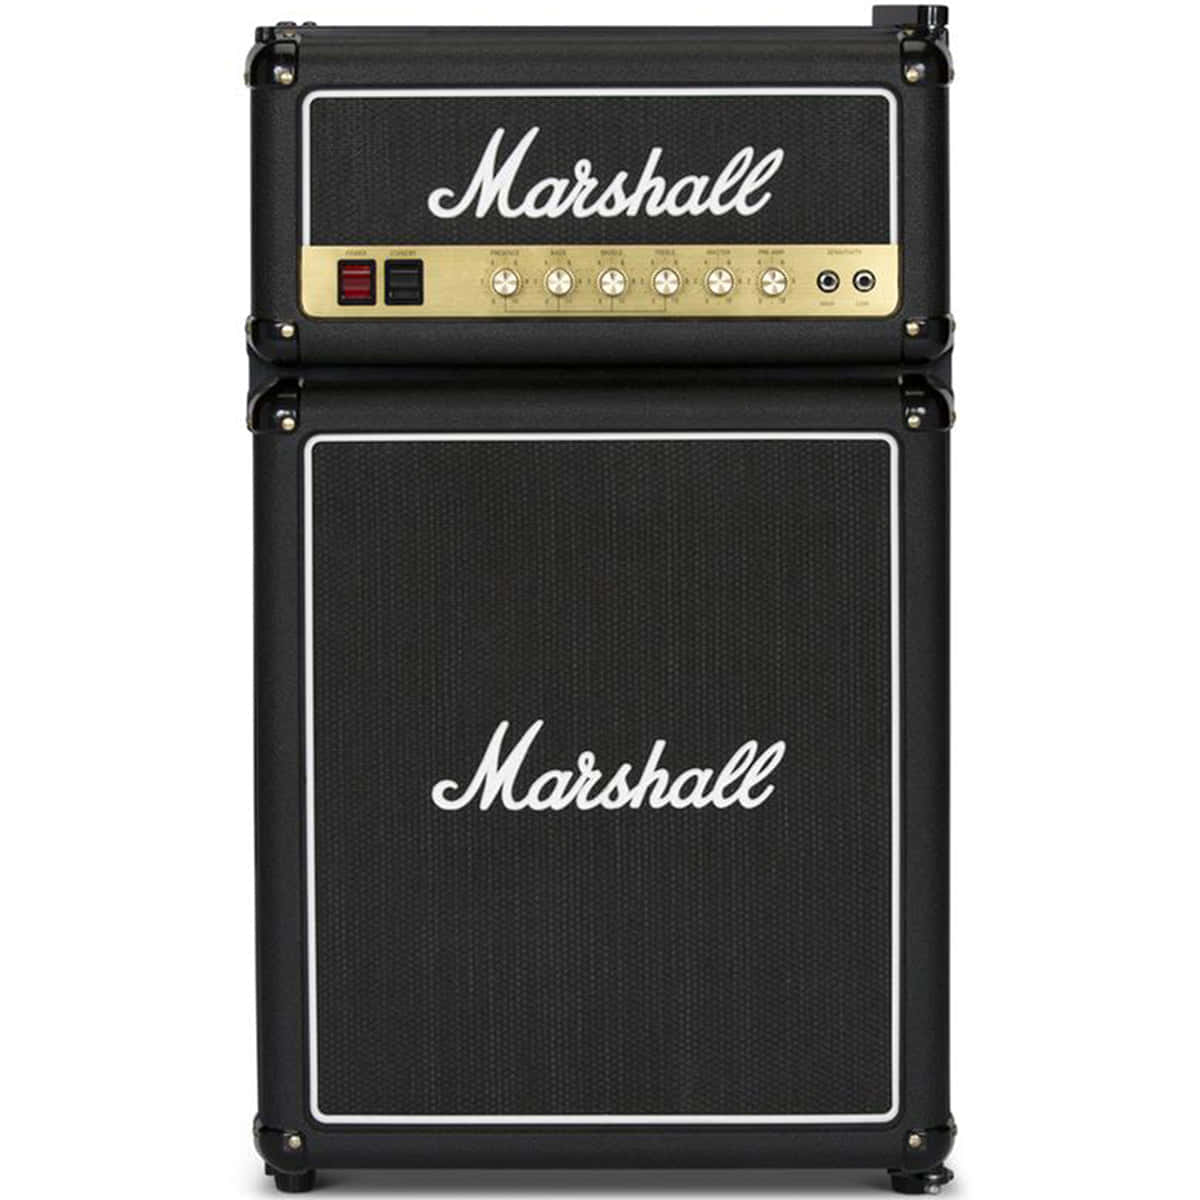 Capture the stage-ready sound of the legendary Marshall guitar amp.